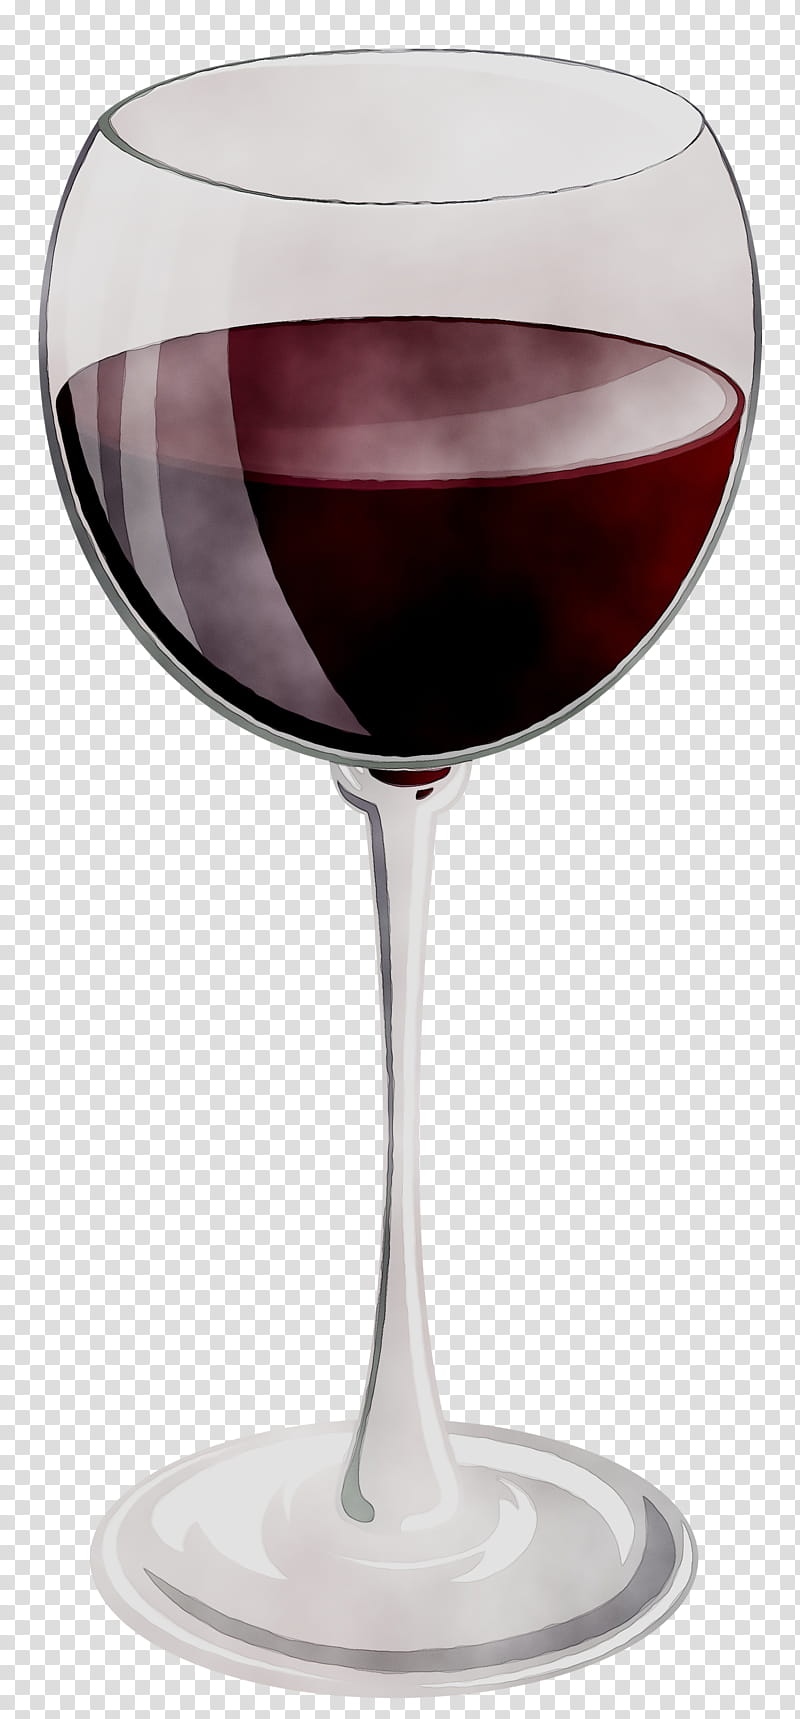 Wine, Wine Glass, Red Wine, Kir, Wine Cocktail, Champagne Glass, Maroon, Stemware transparent background PNG clipart